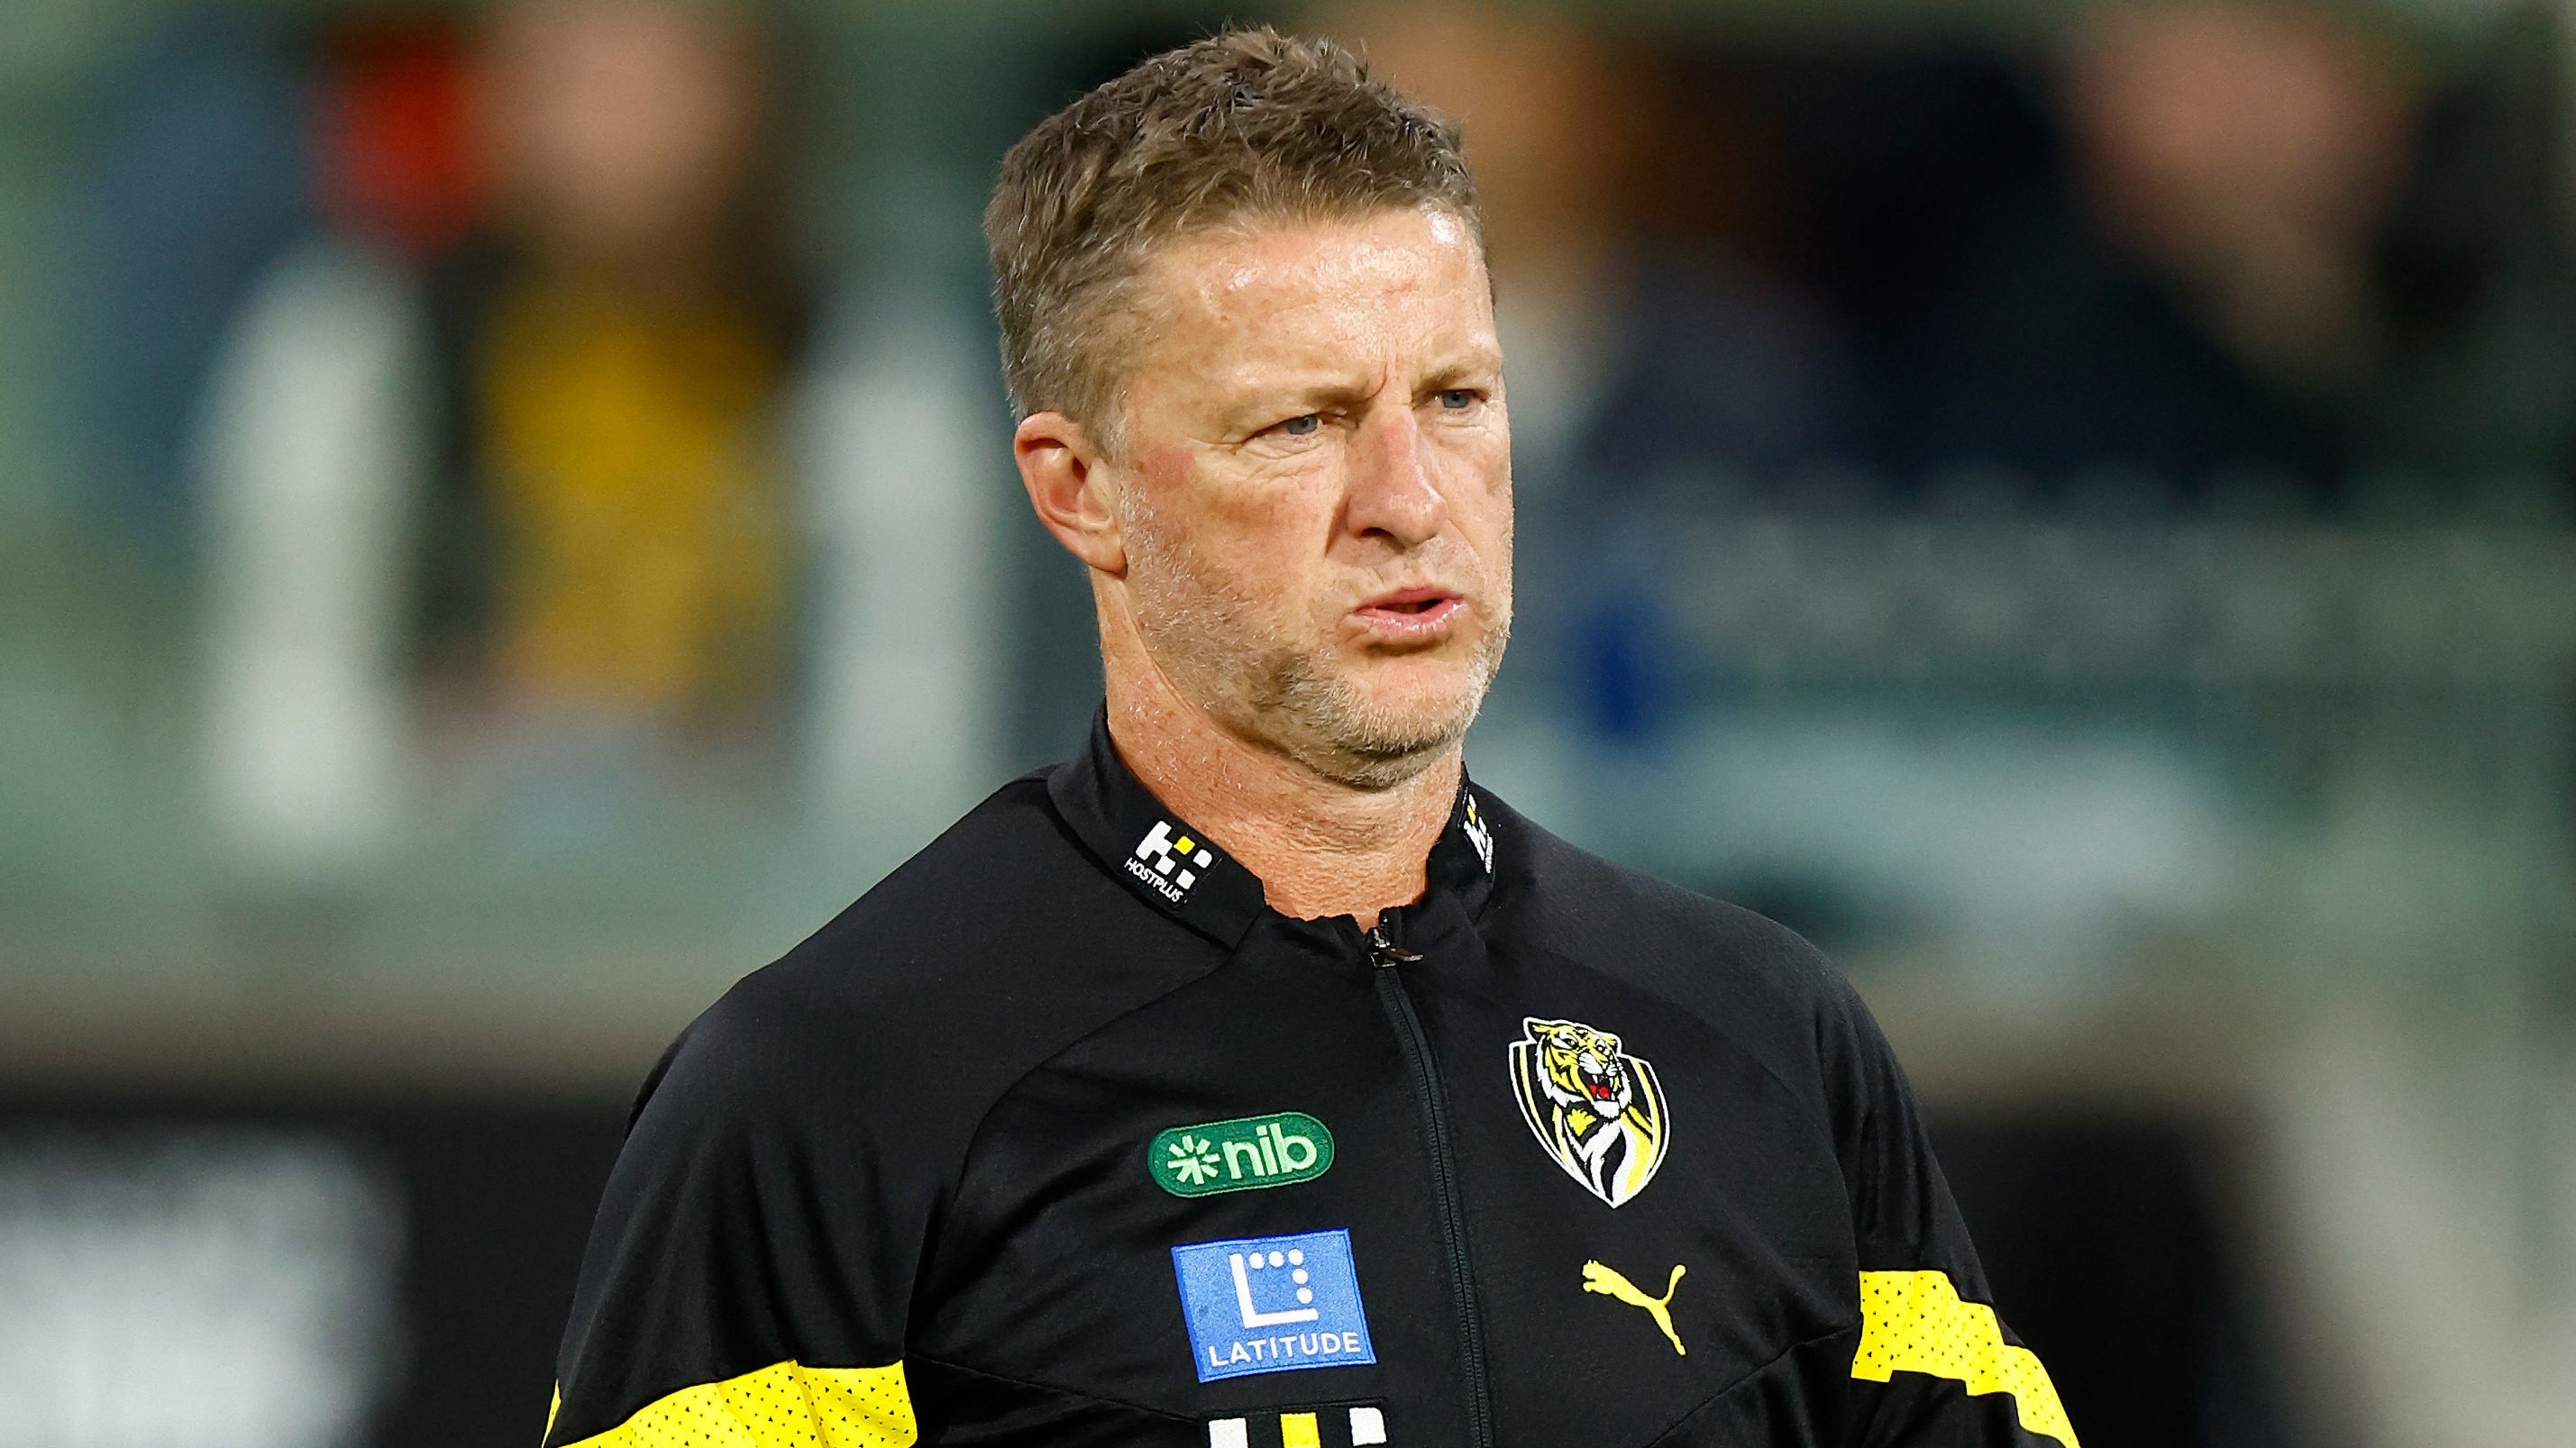 MELBOURNE, AUSTRALIA - MARCH 31: Damien Hardwick, Senior Coach of the Tigers looks on during the 2023 AFL Round 03 match between the Collingwood Magpies and the Richmond Tigers at the Melbourne Cricket Ground on March 31, 2023 in Melbourne, Australia. (Photo by Michael Willson/AFL Photos)